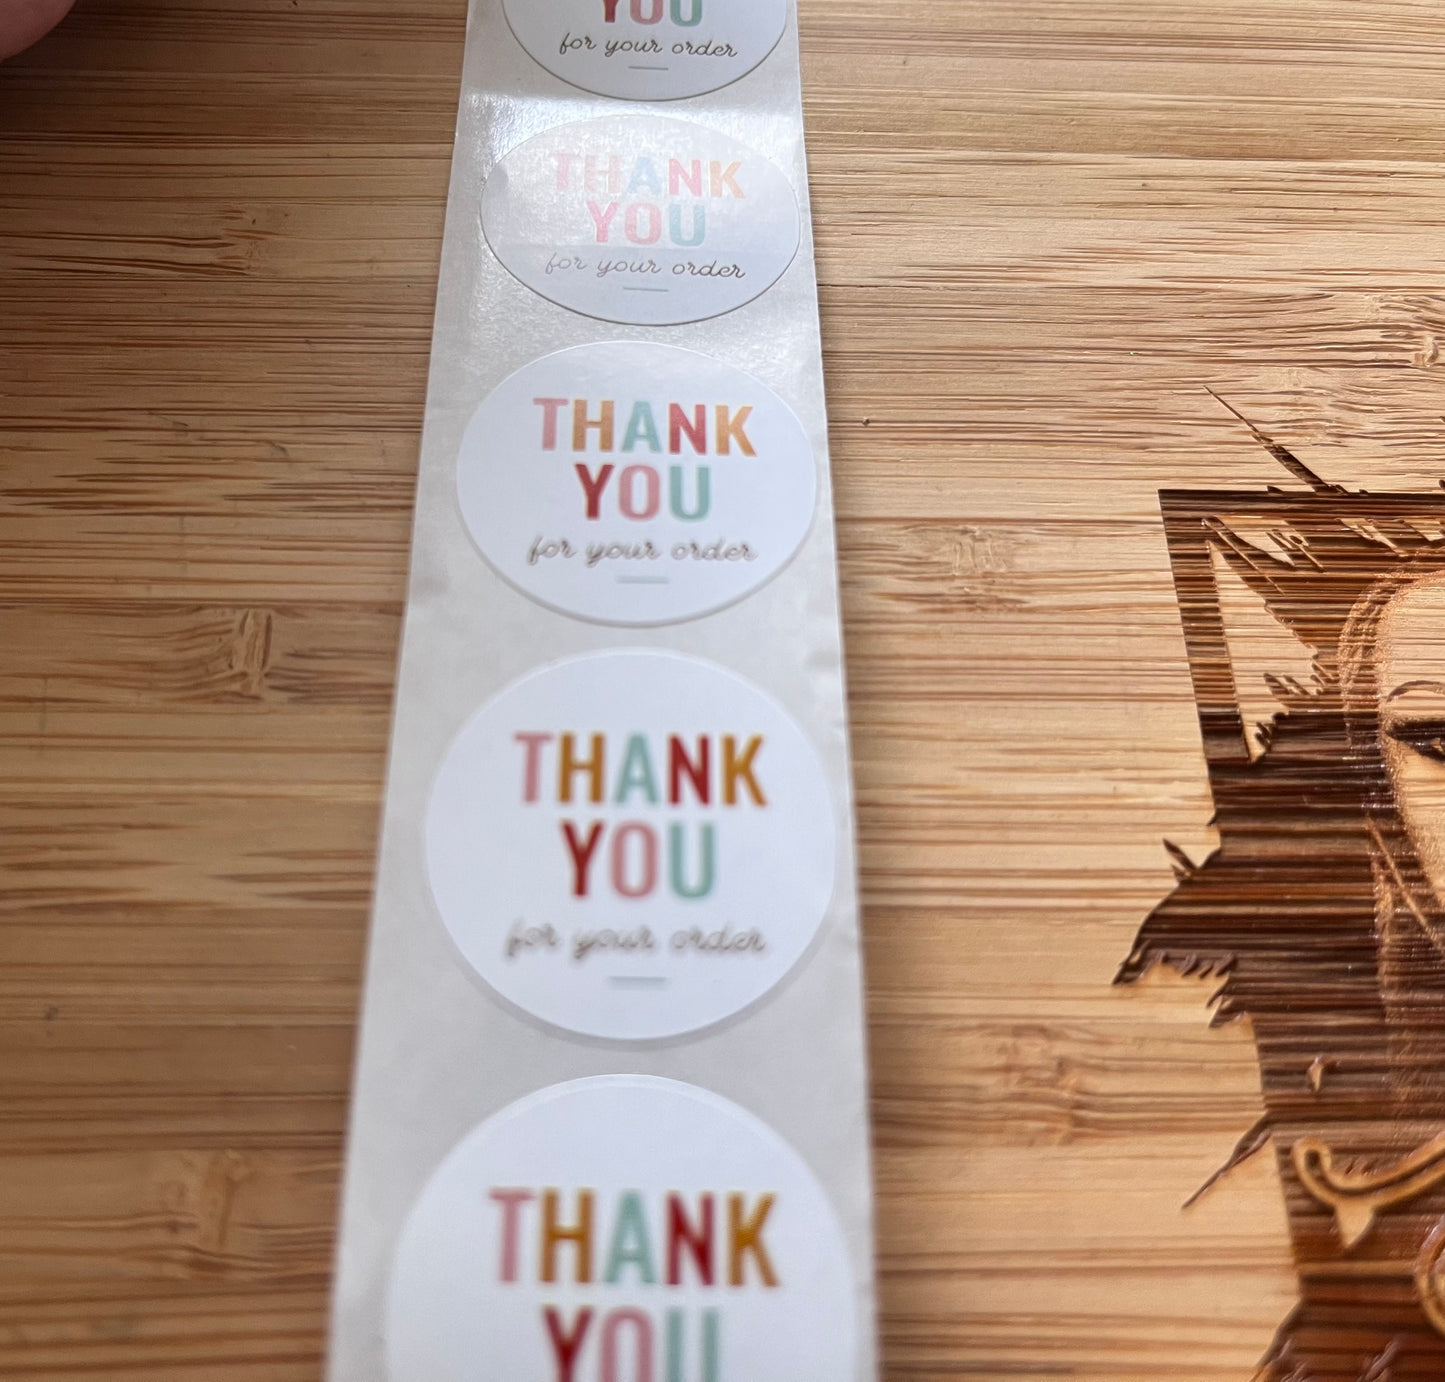 Thank you for your order stickers